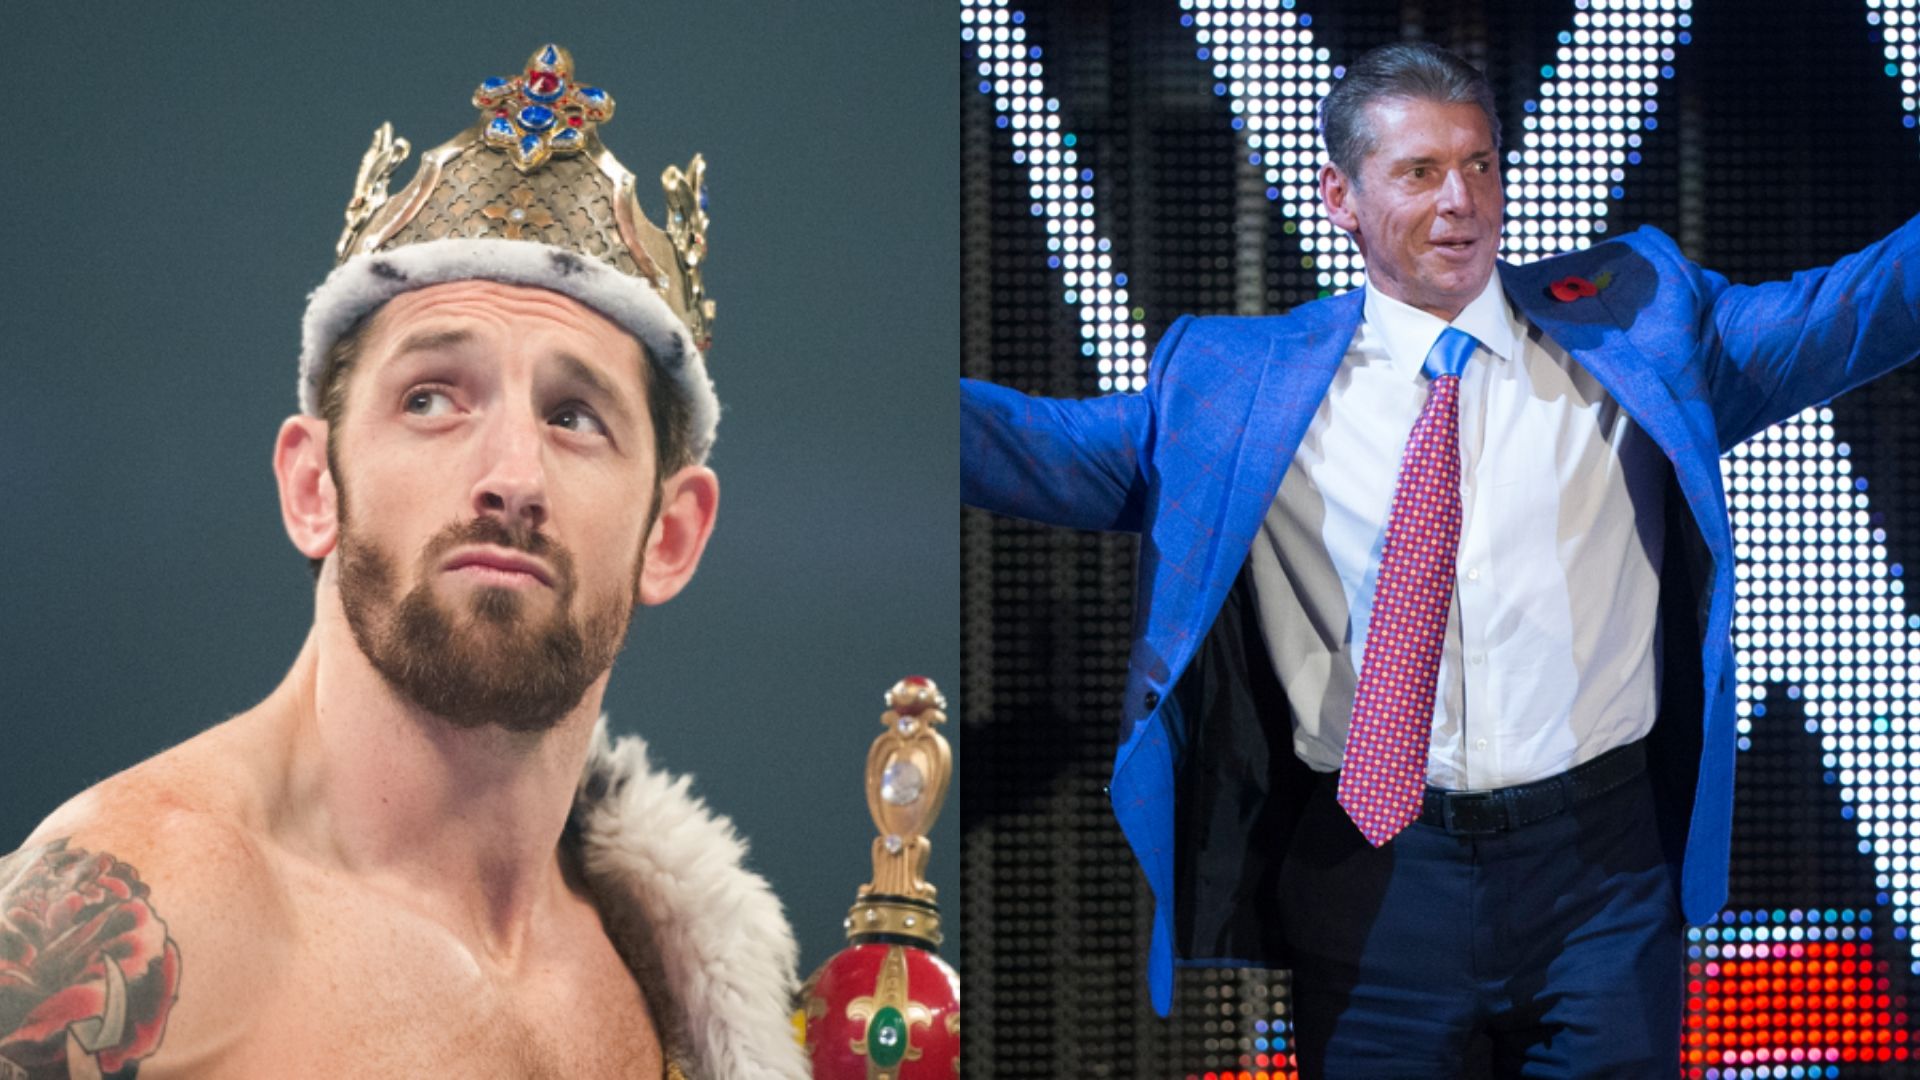 Wade Barrett explained how much control Vince McMahon has in WWE